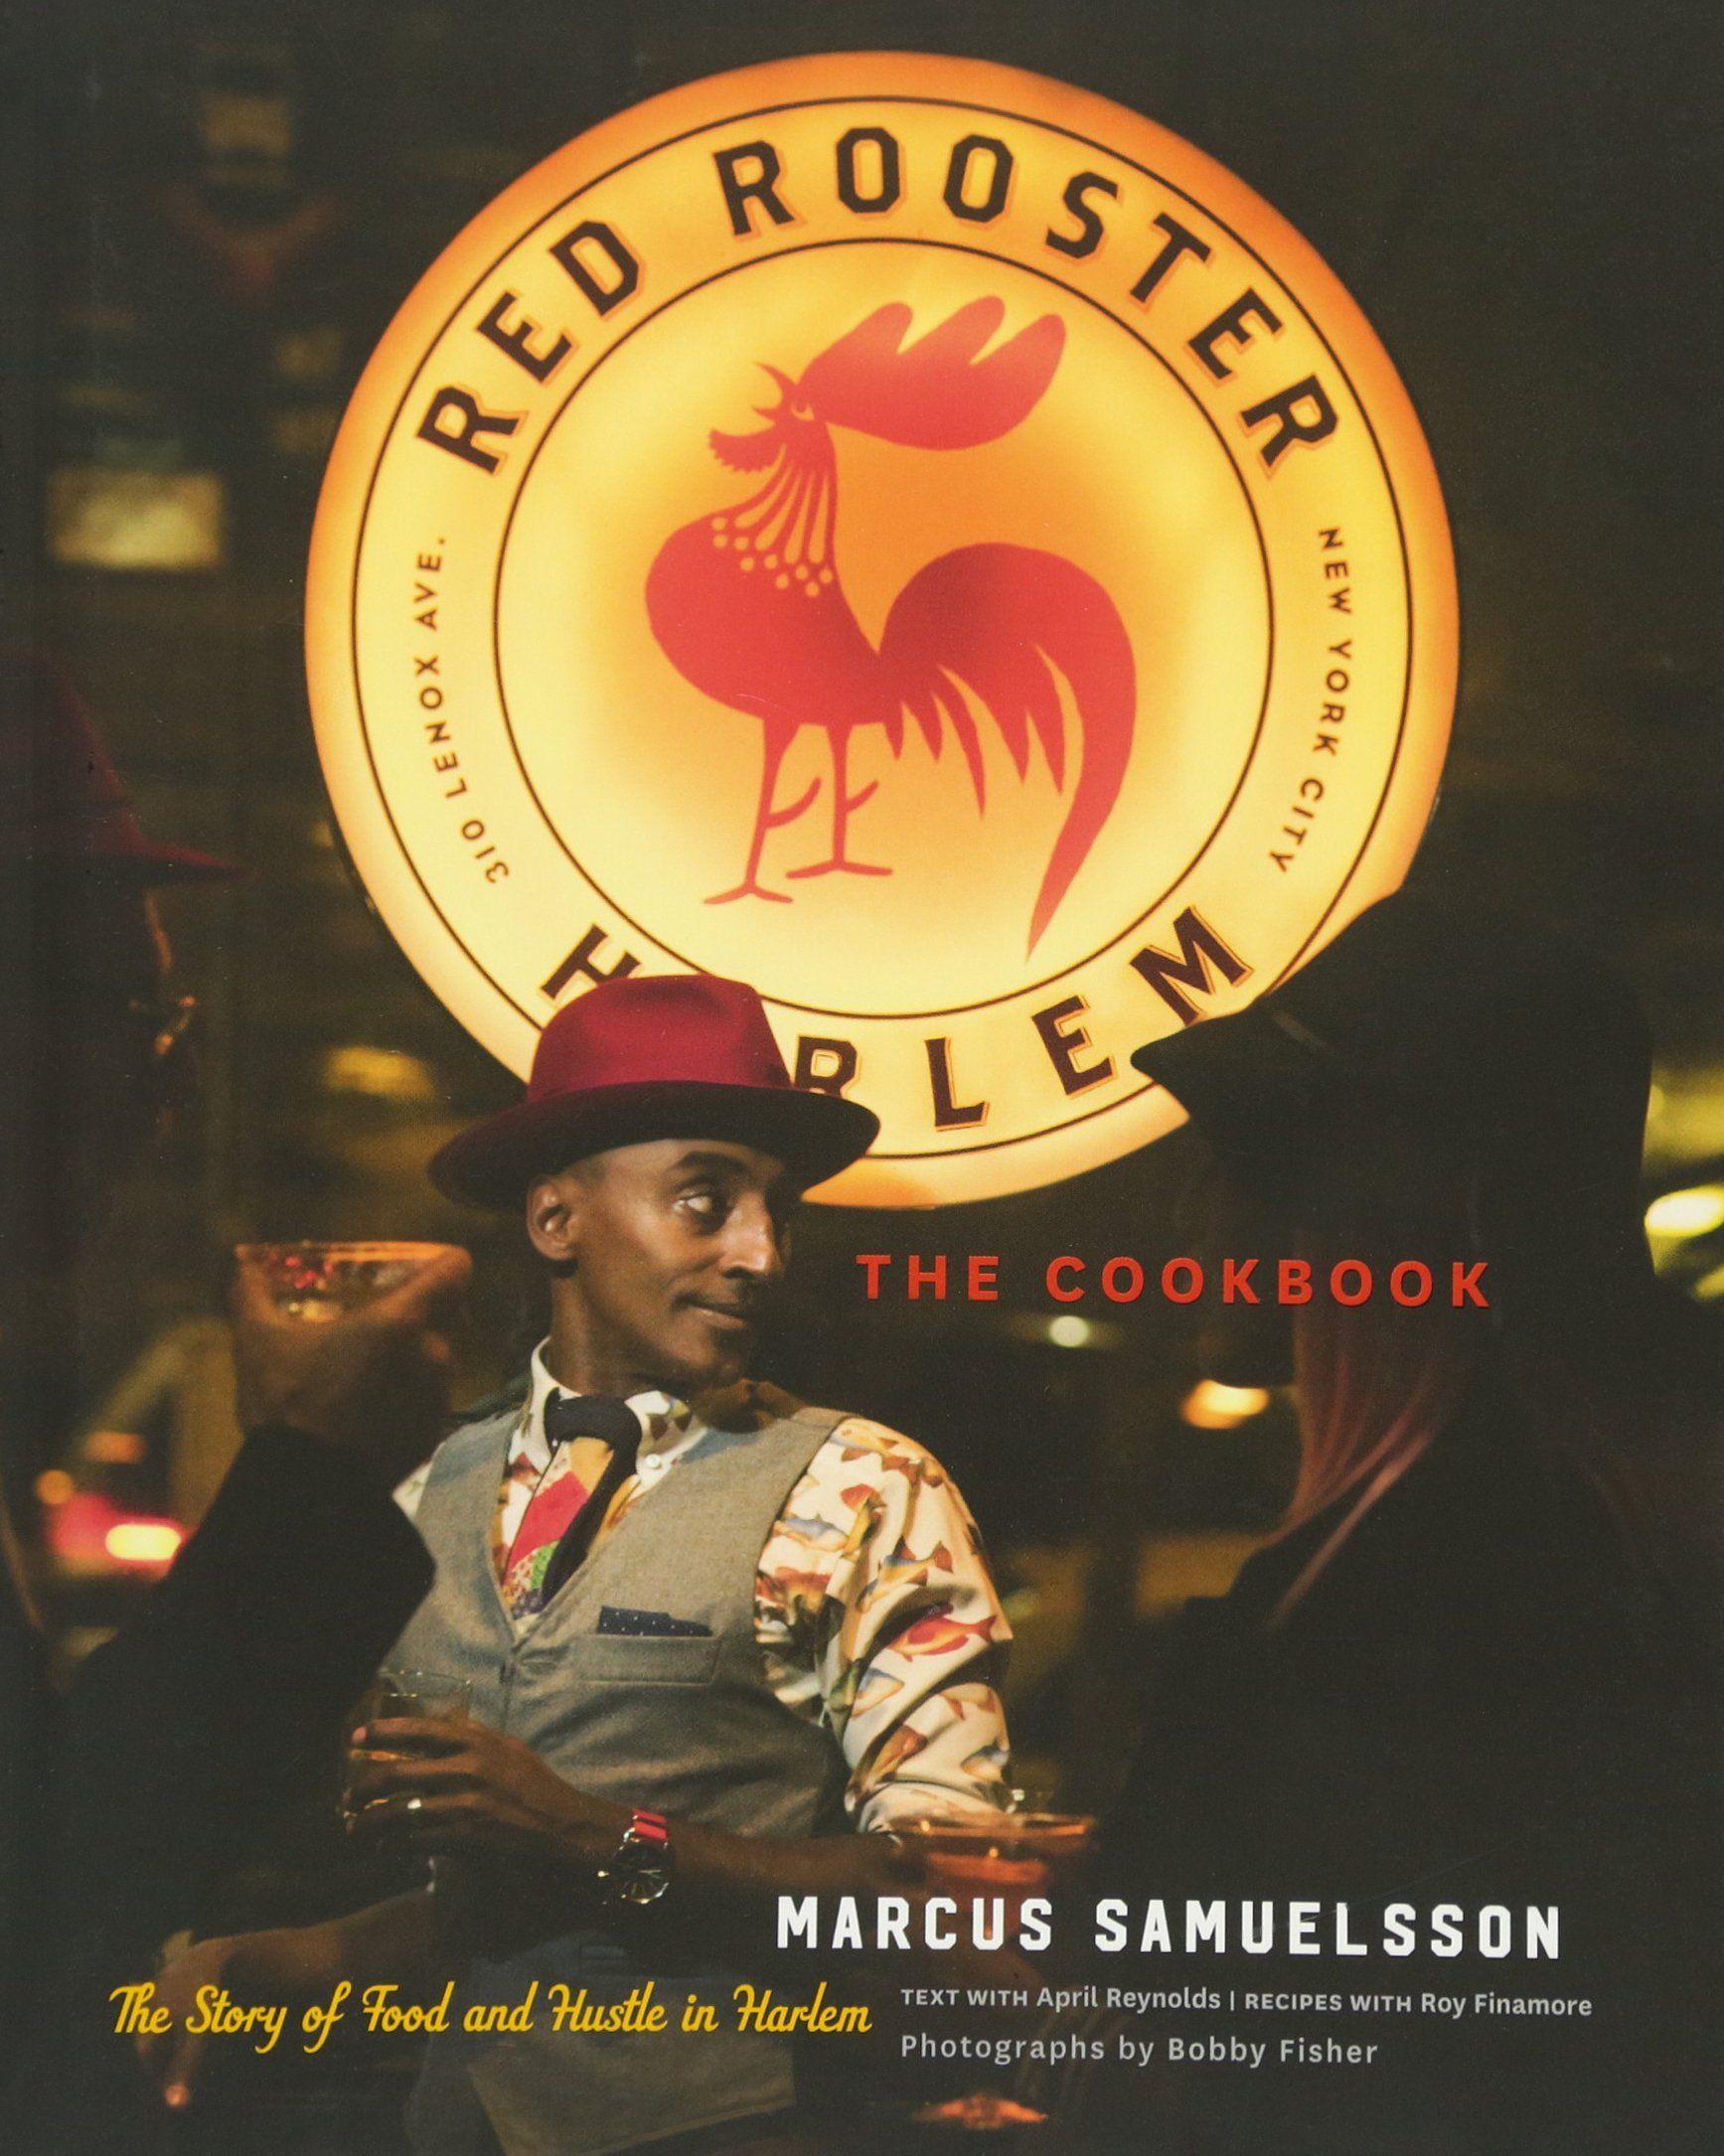 Black and Red Rooster Restaurant Logo - The Red Rooster Cookbook: The Story of Food and Hustle in Harlem ...